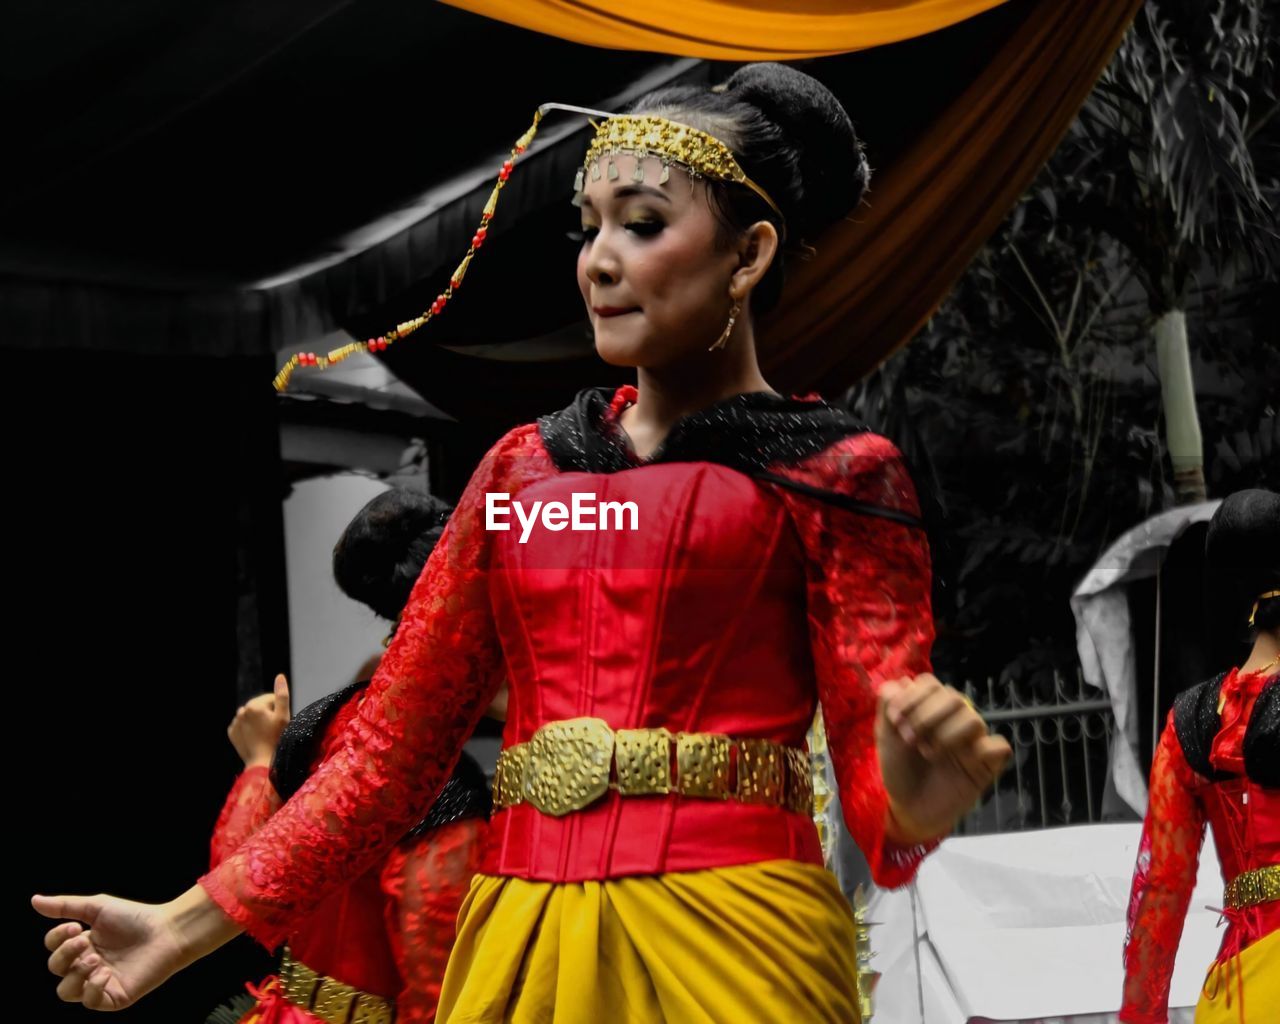 Traditional indonesian dance and clothing